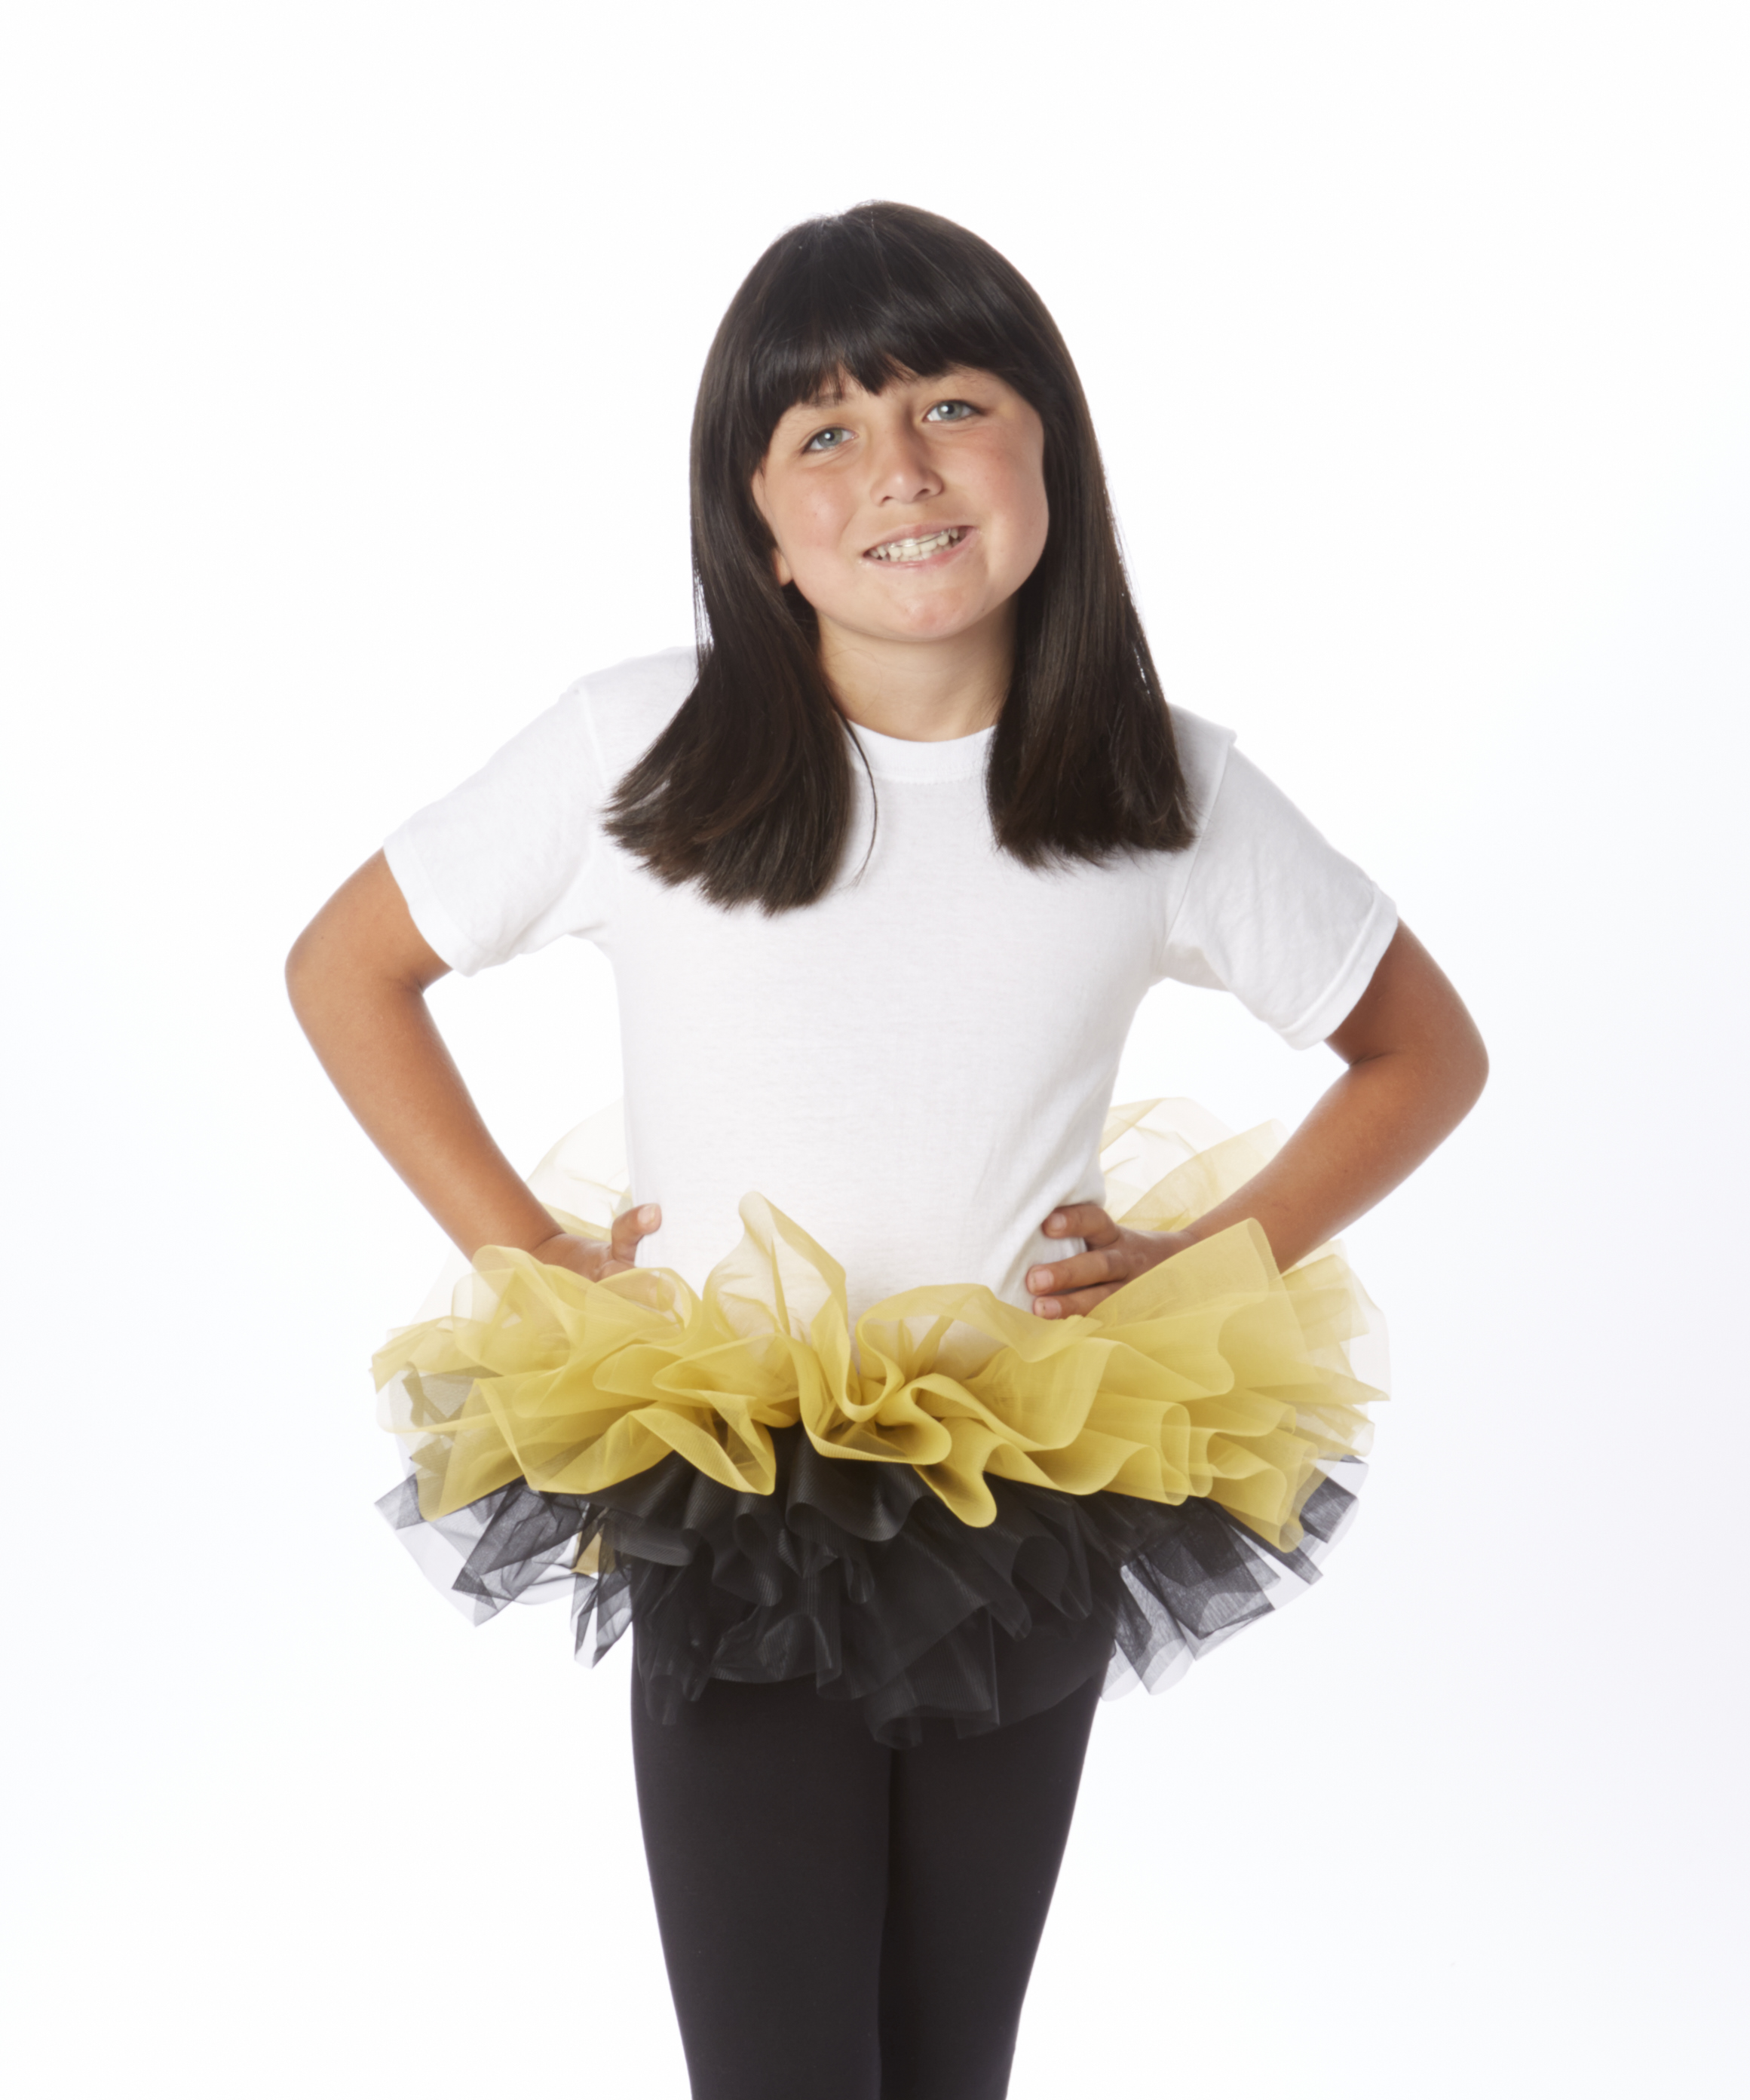 Zulily Product Modeling for the Tutu Spectacular